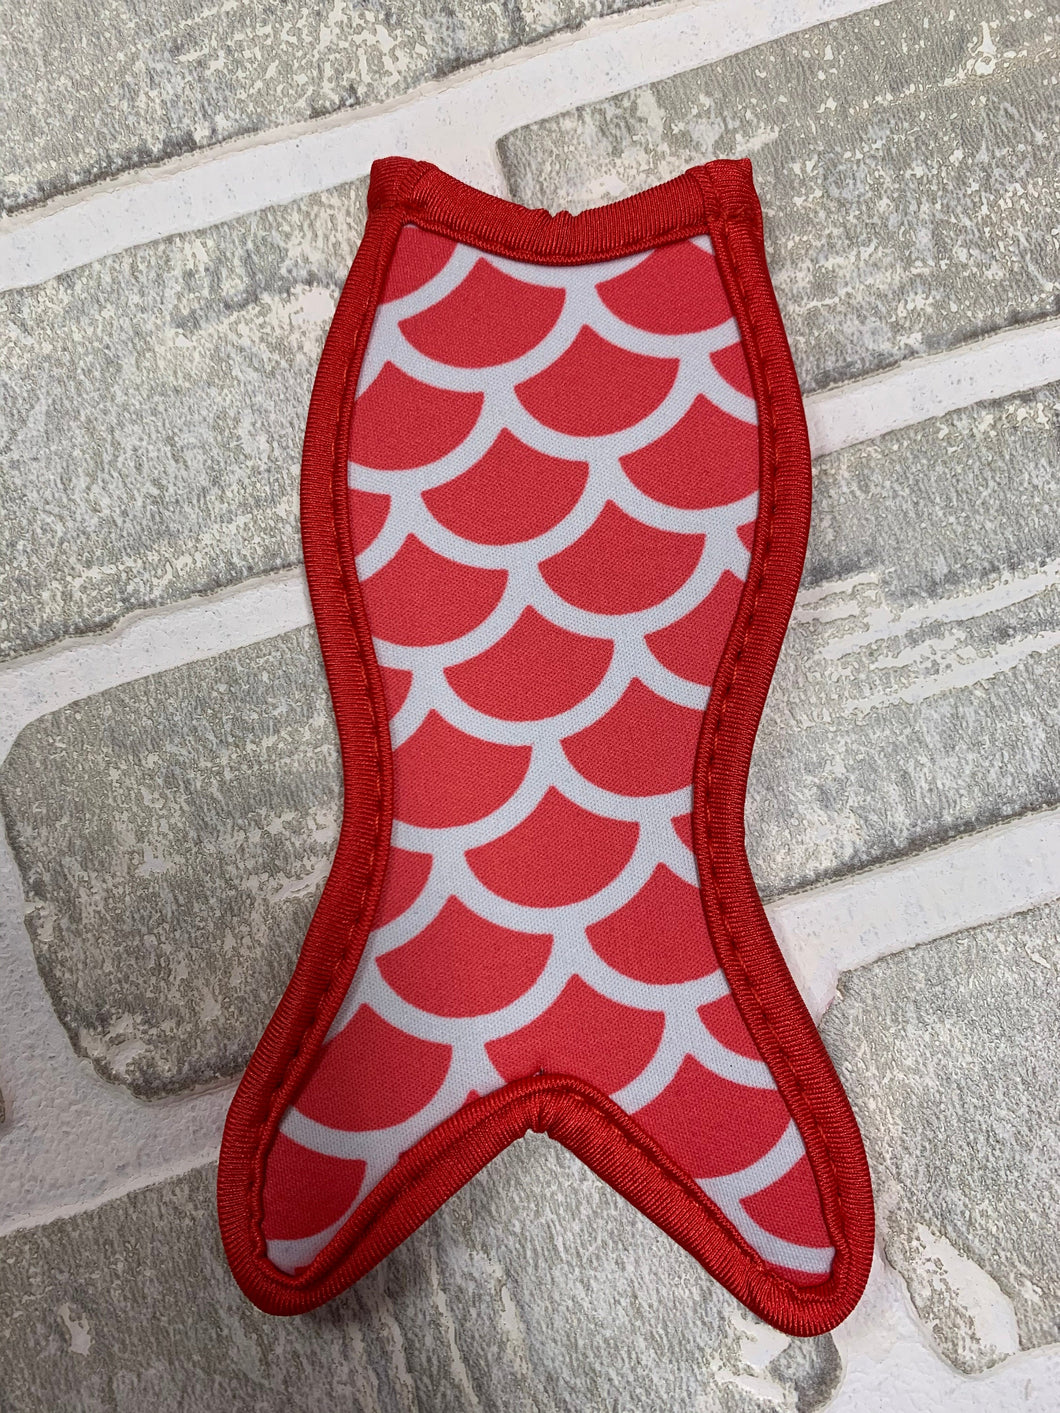 Red and white mermaid tail popsicle holder blanks